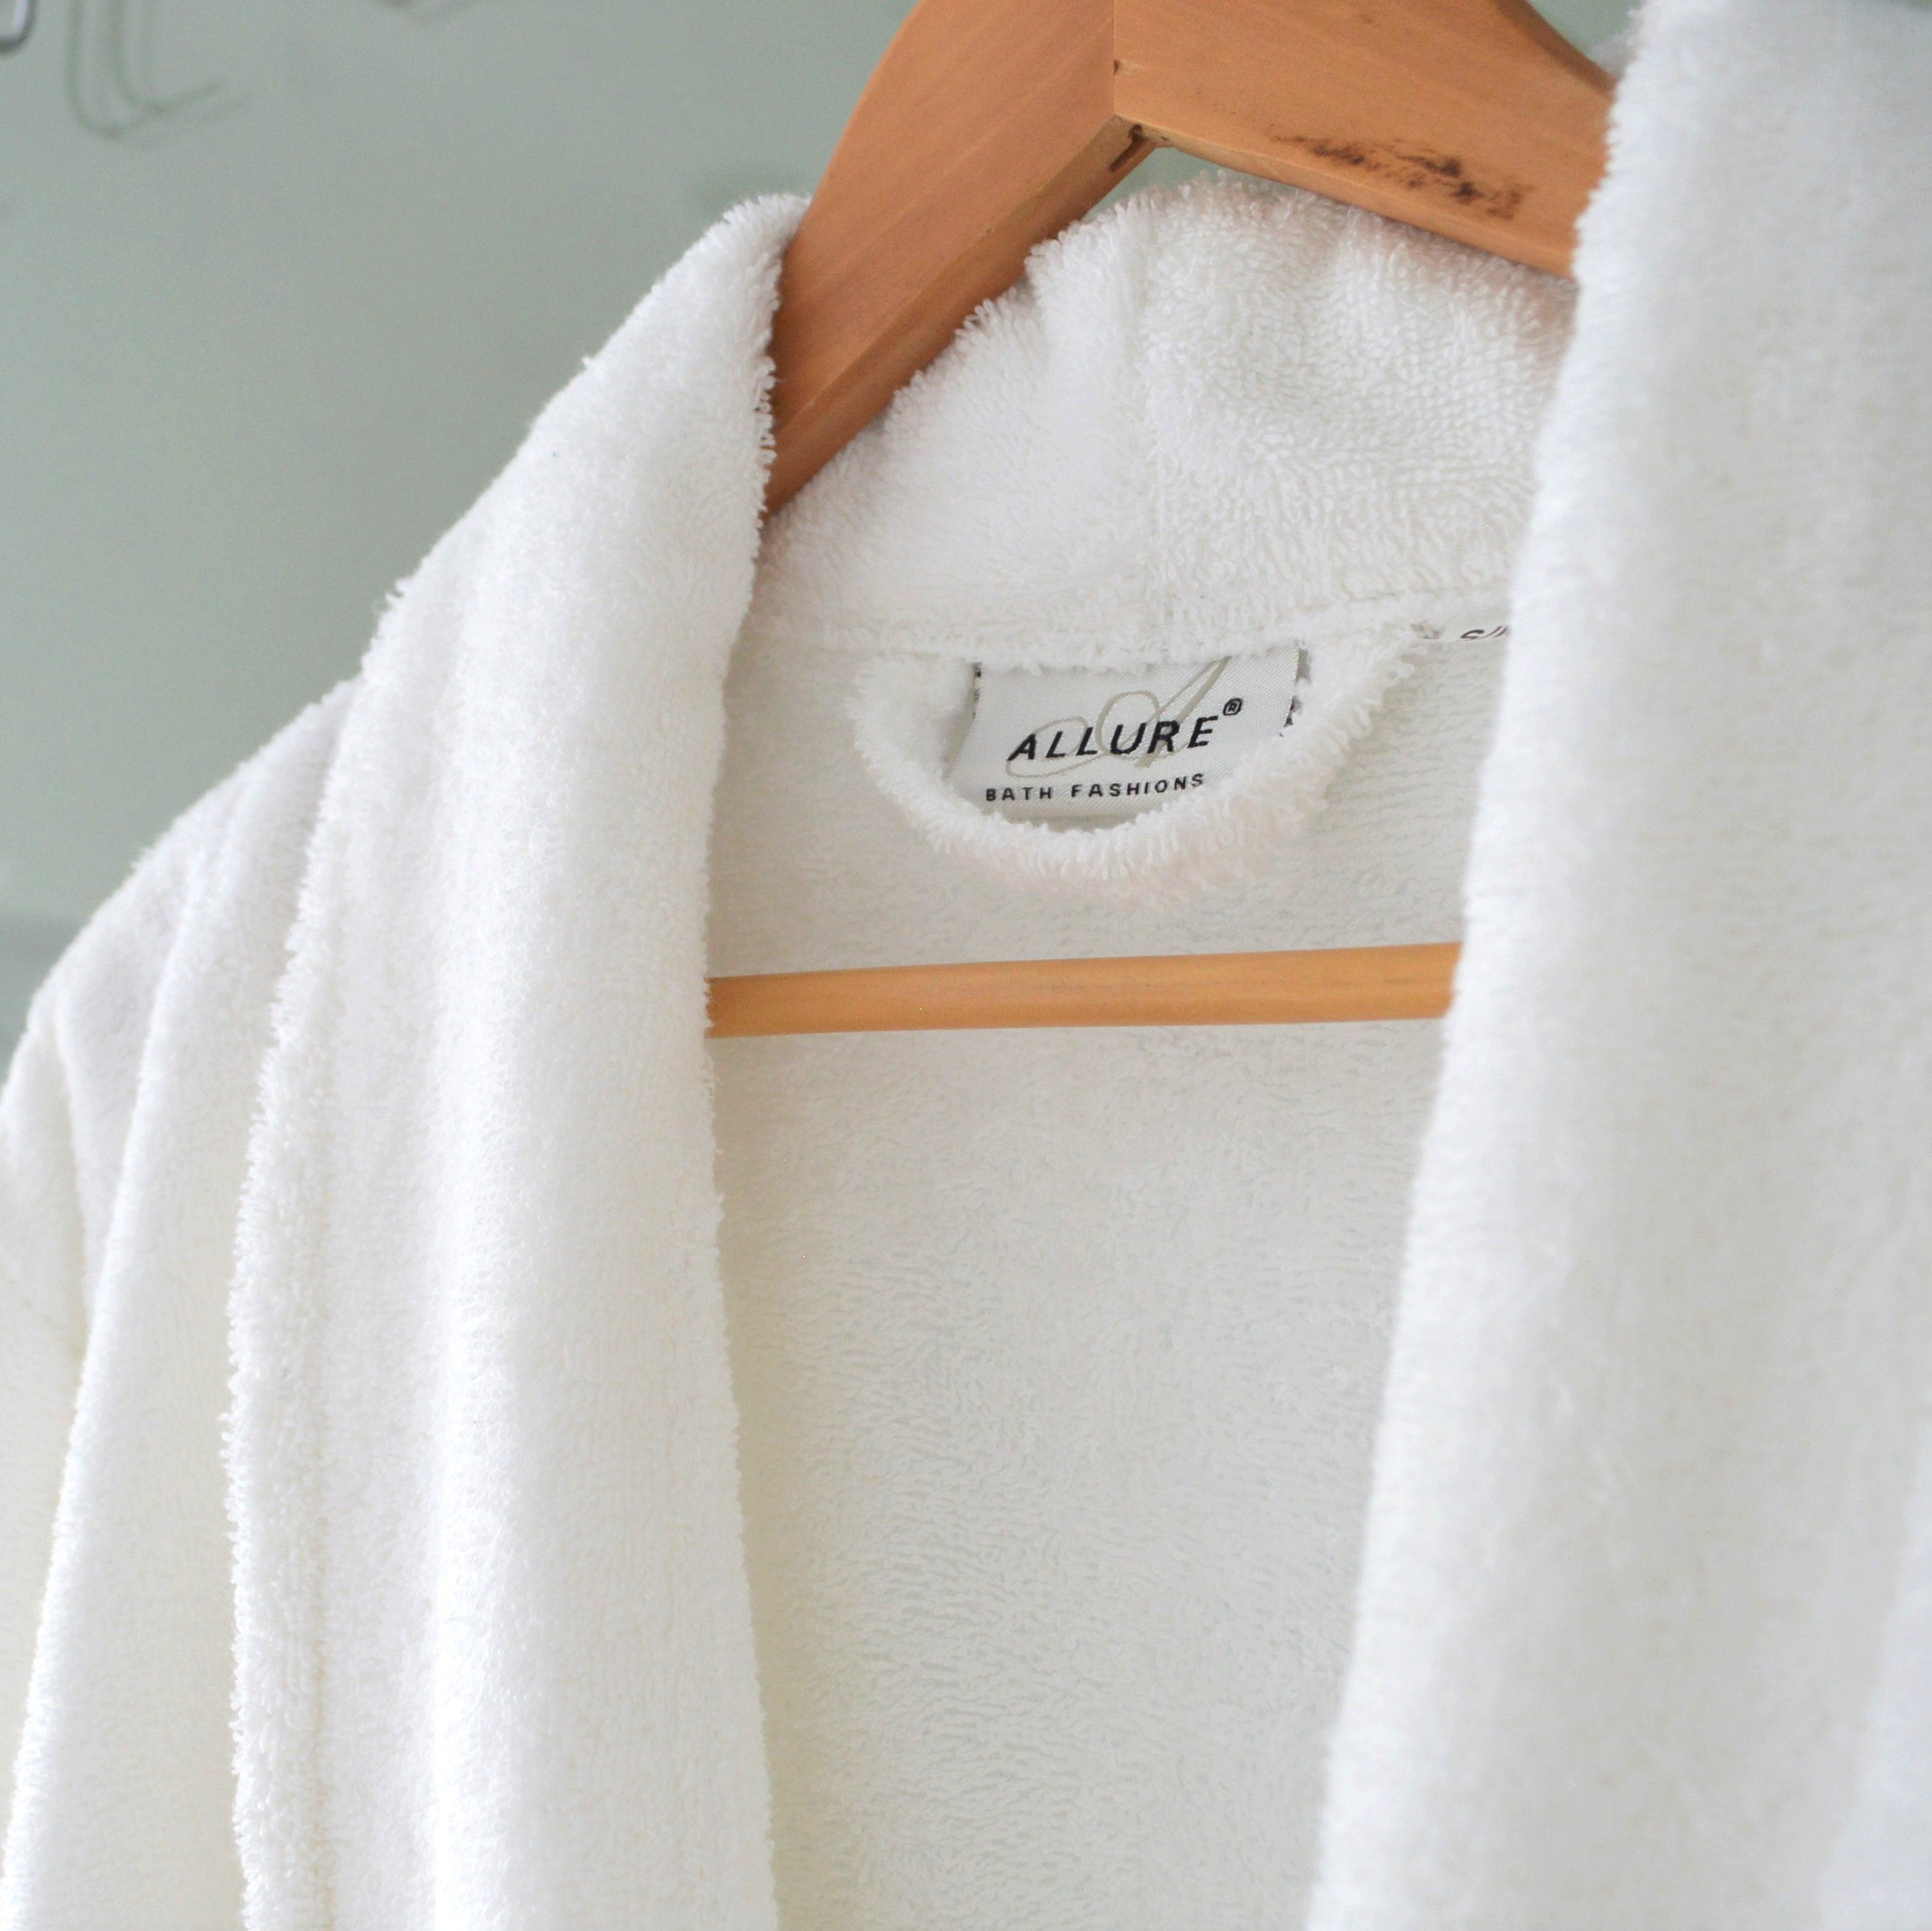 Towelling Bathrobes, Spa Dressing Gowns & Shower Wraps